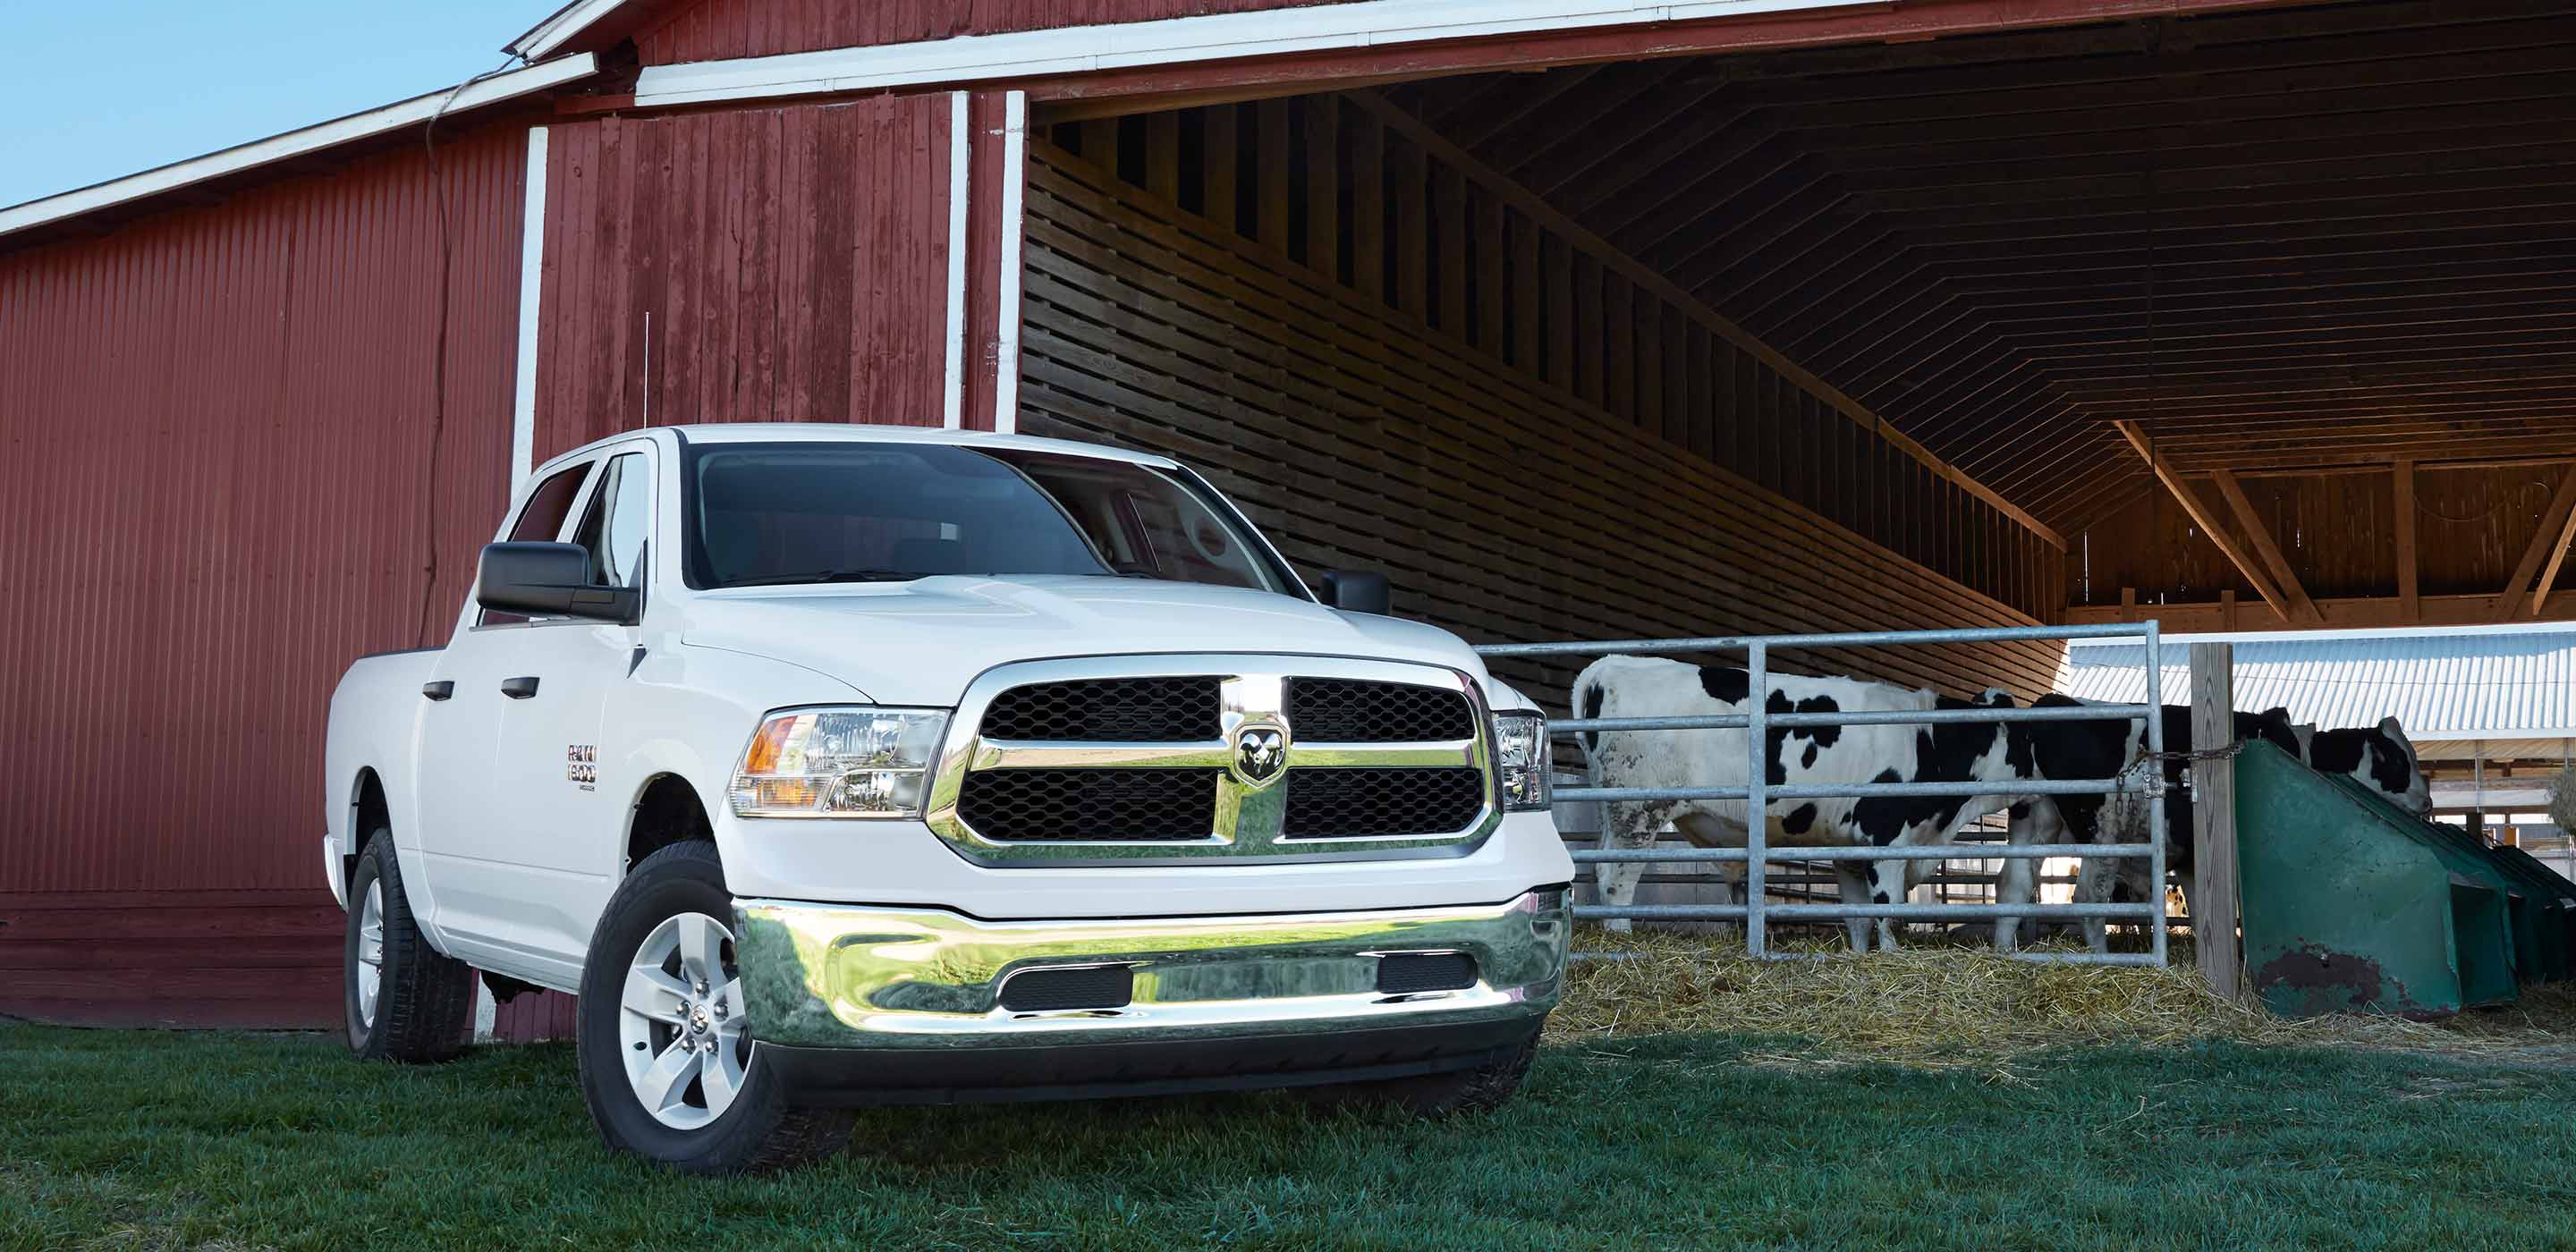 Display The 2022 Ram 1500 Classic parked on the grass outside a cattle barn.